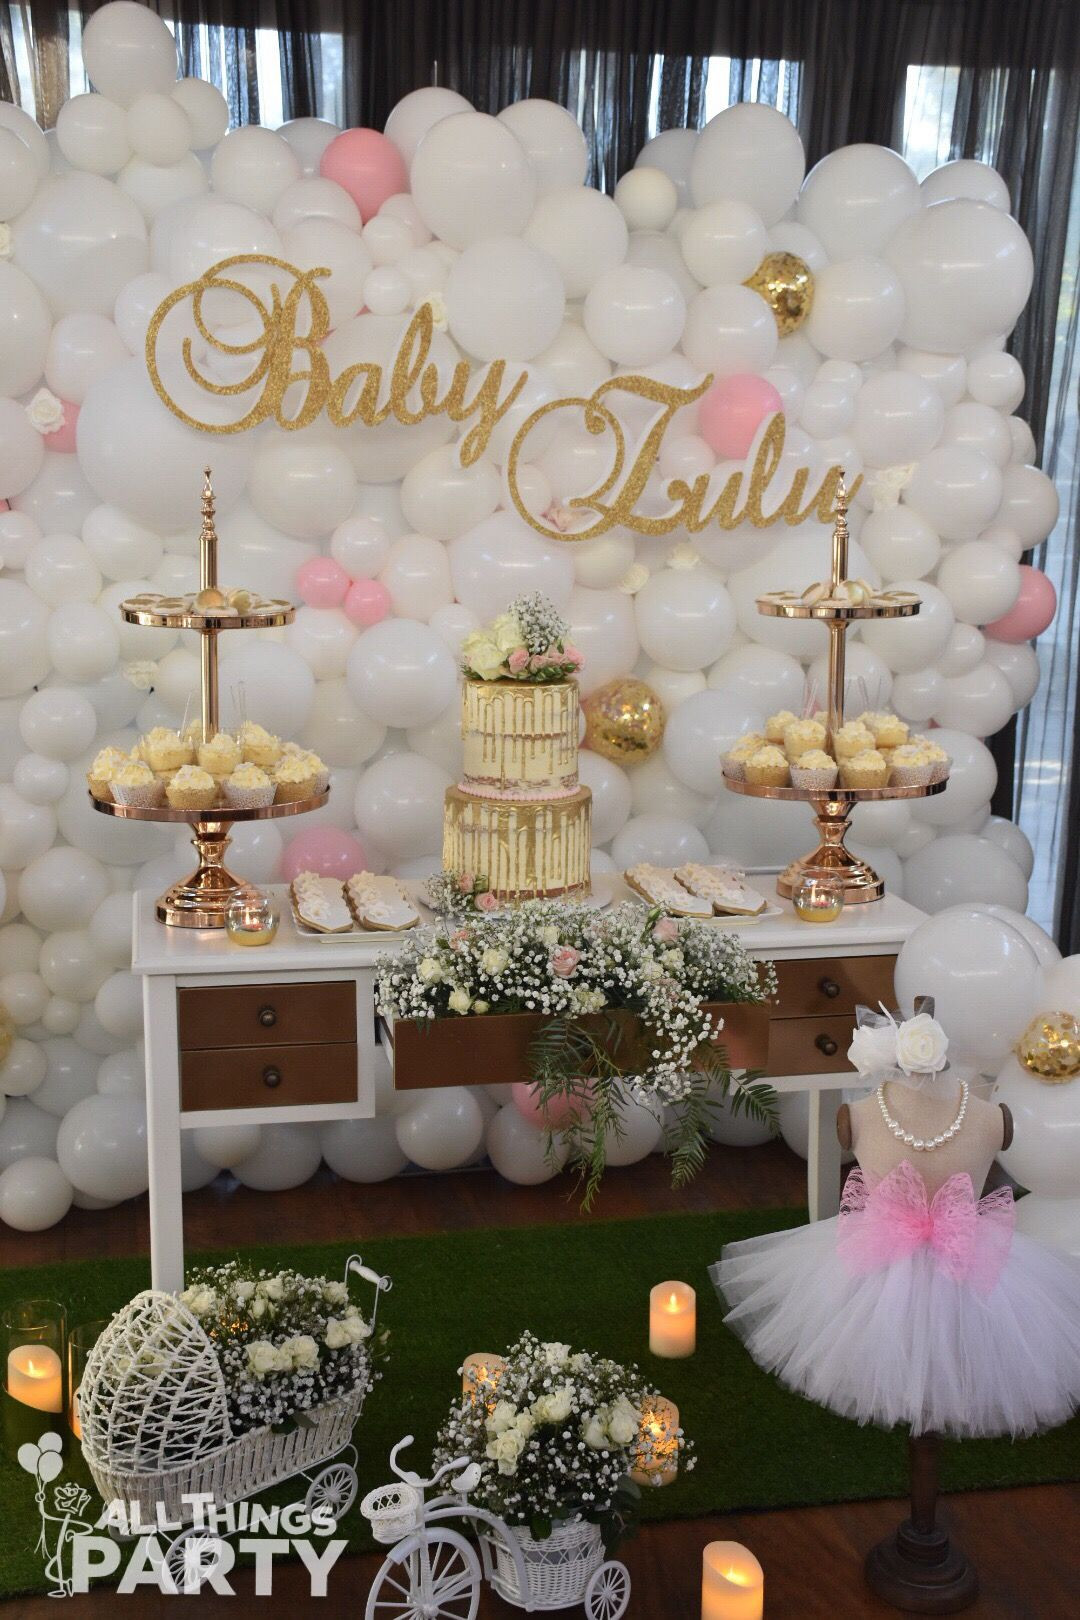 Baby Shower Wall Decorations Ideas
 Balloon Wall Backdrop for a Baby Shower in 2019